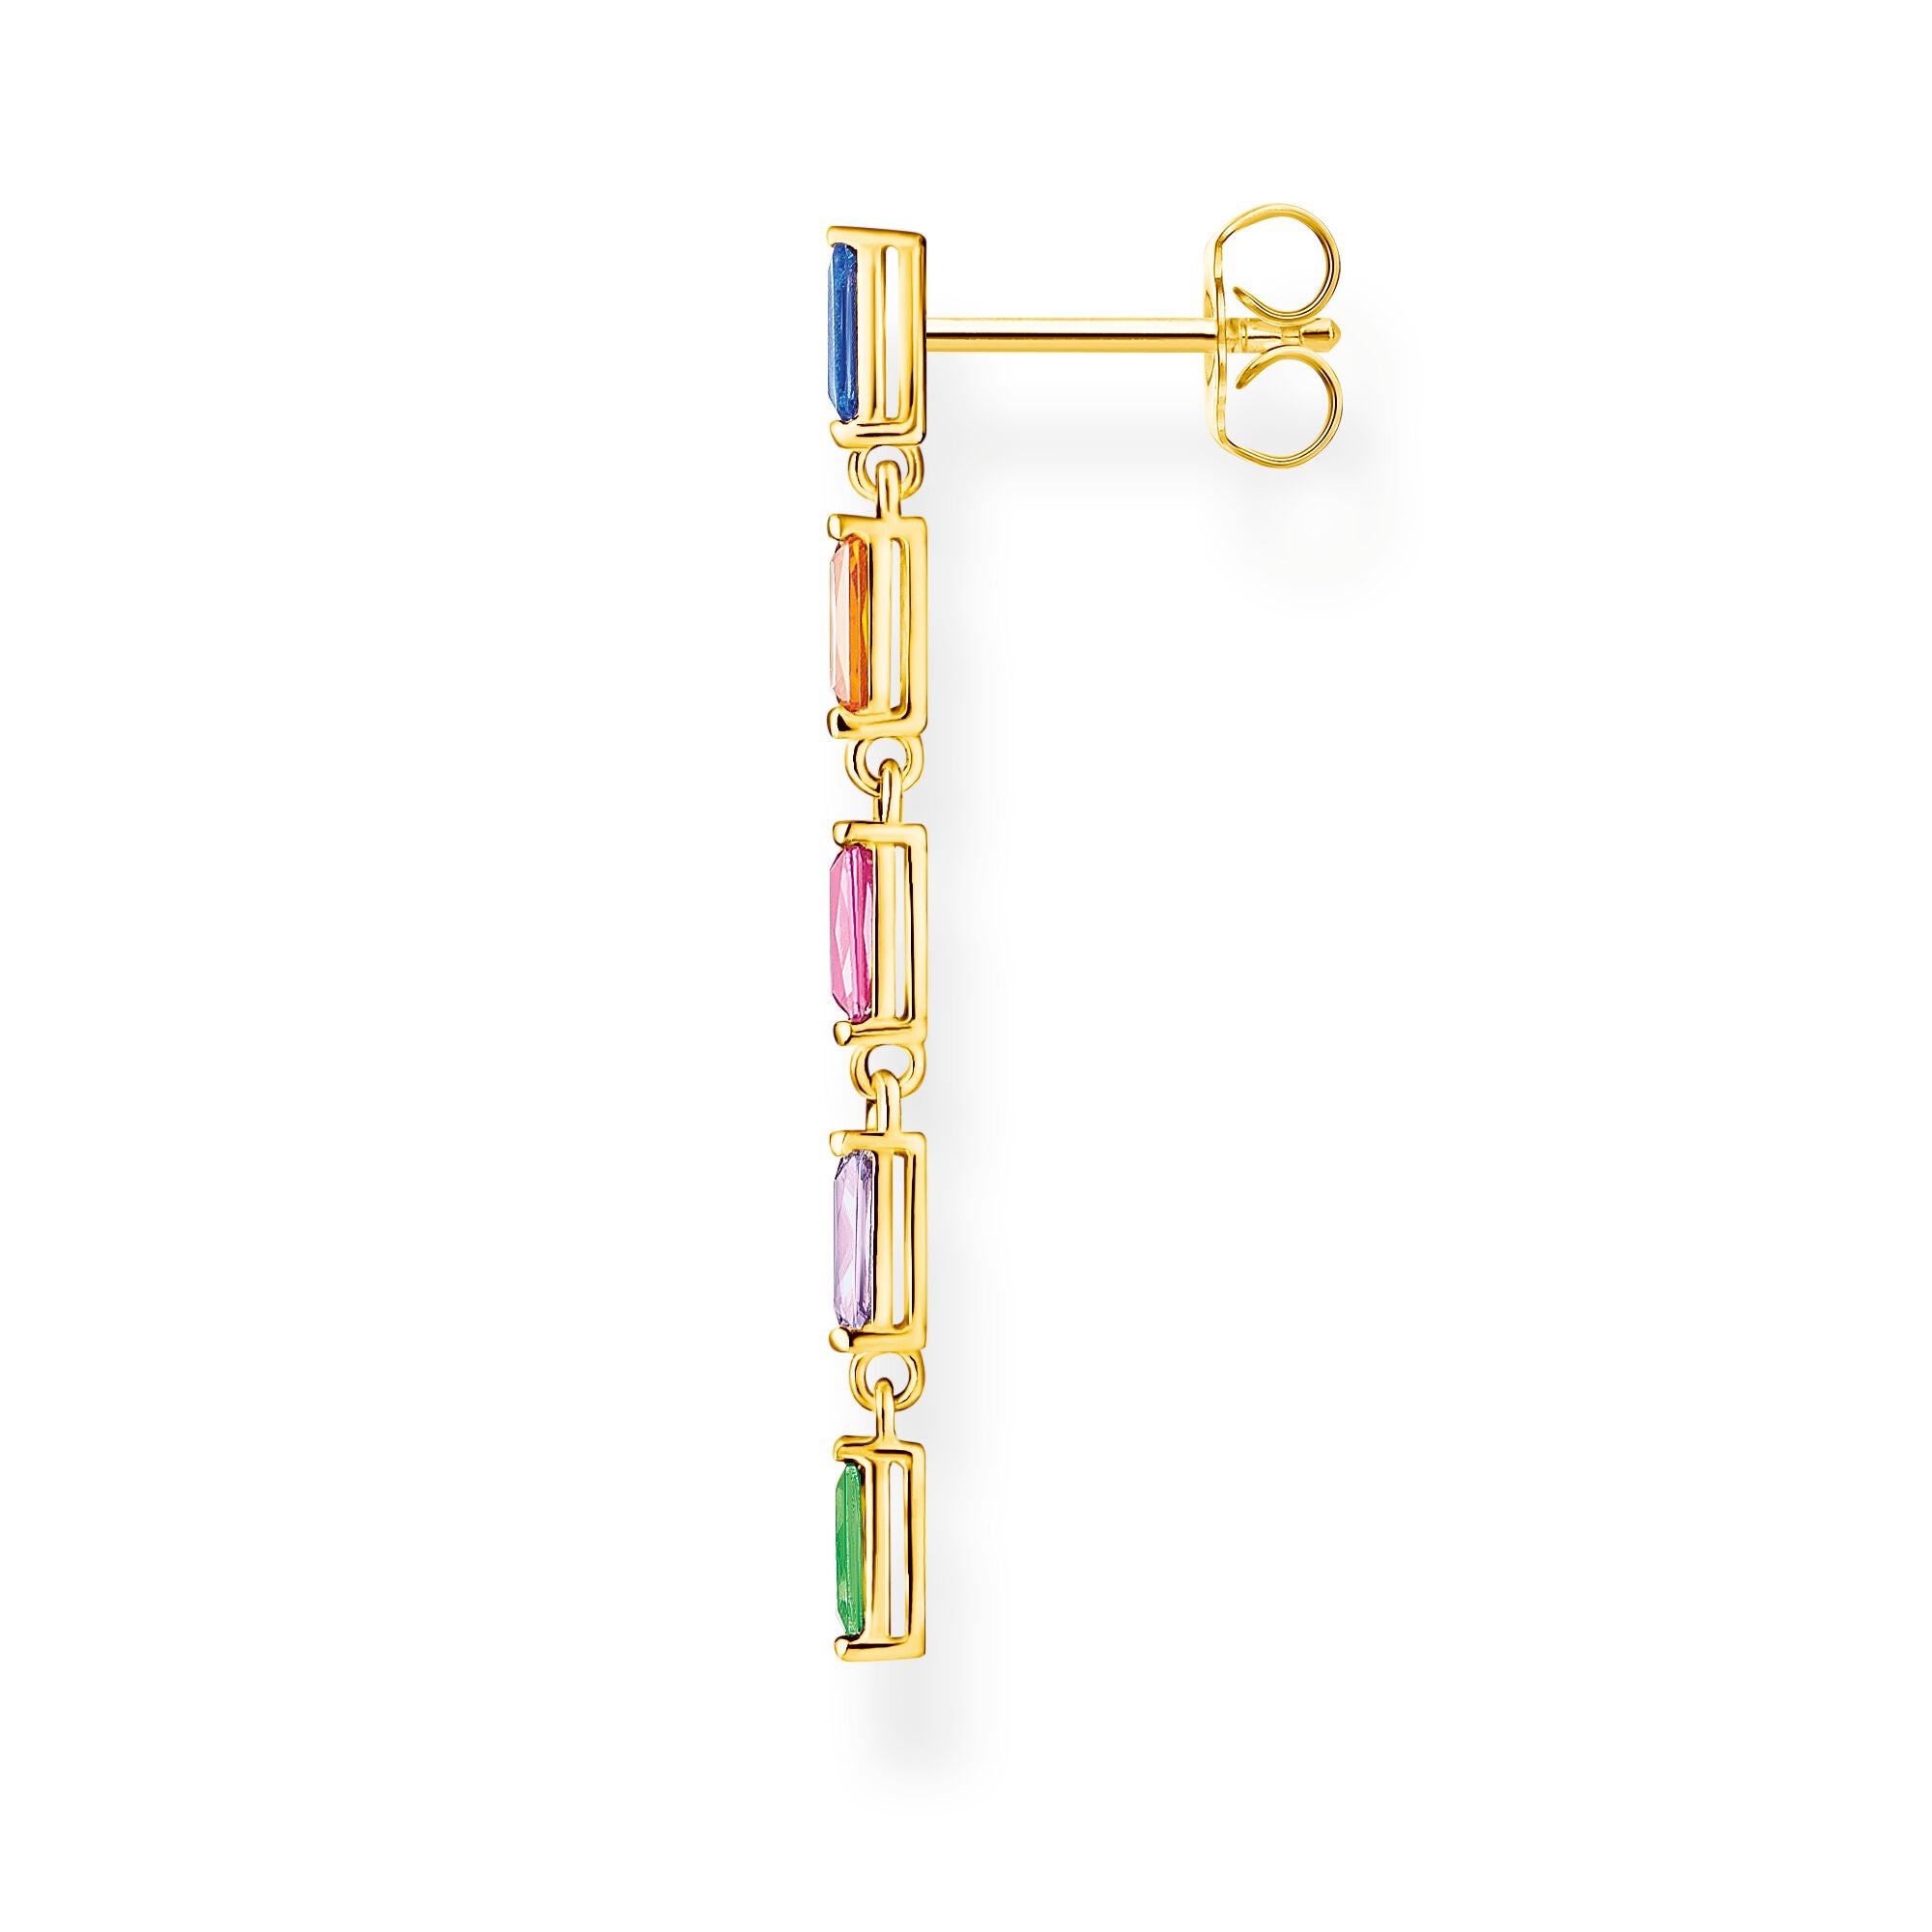 Thomas Sabo sterling silver 18k yellow gold plated, 5 rainbow baguette stones, dangle drop single stud earring